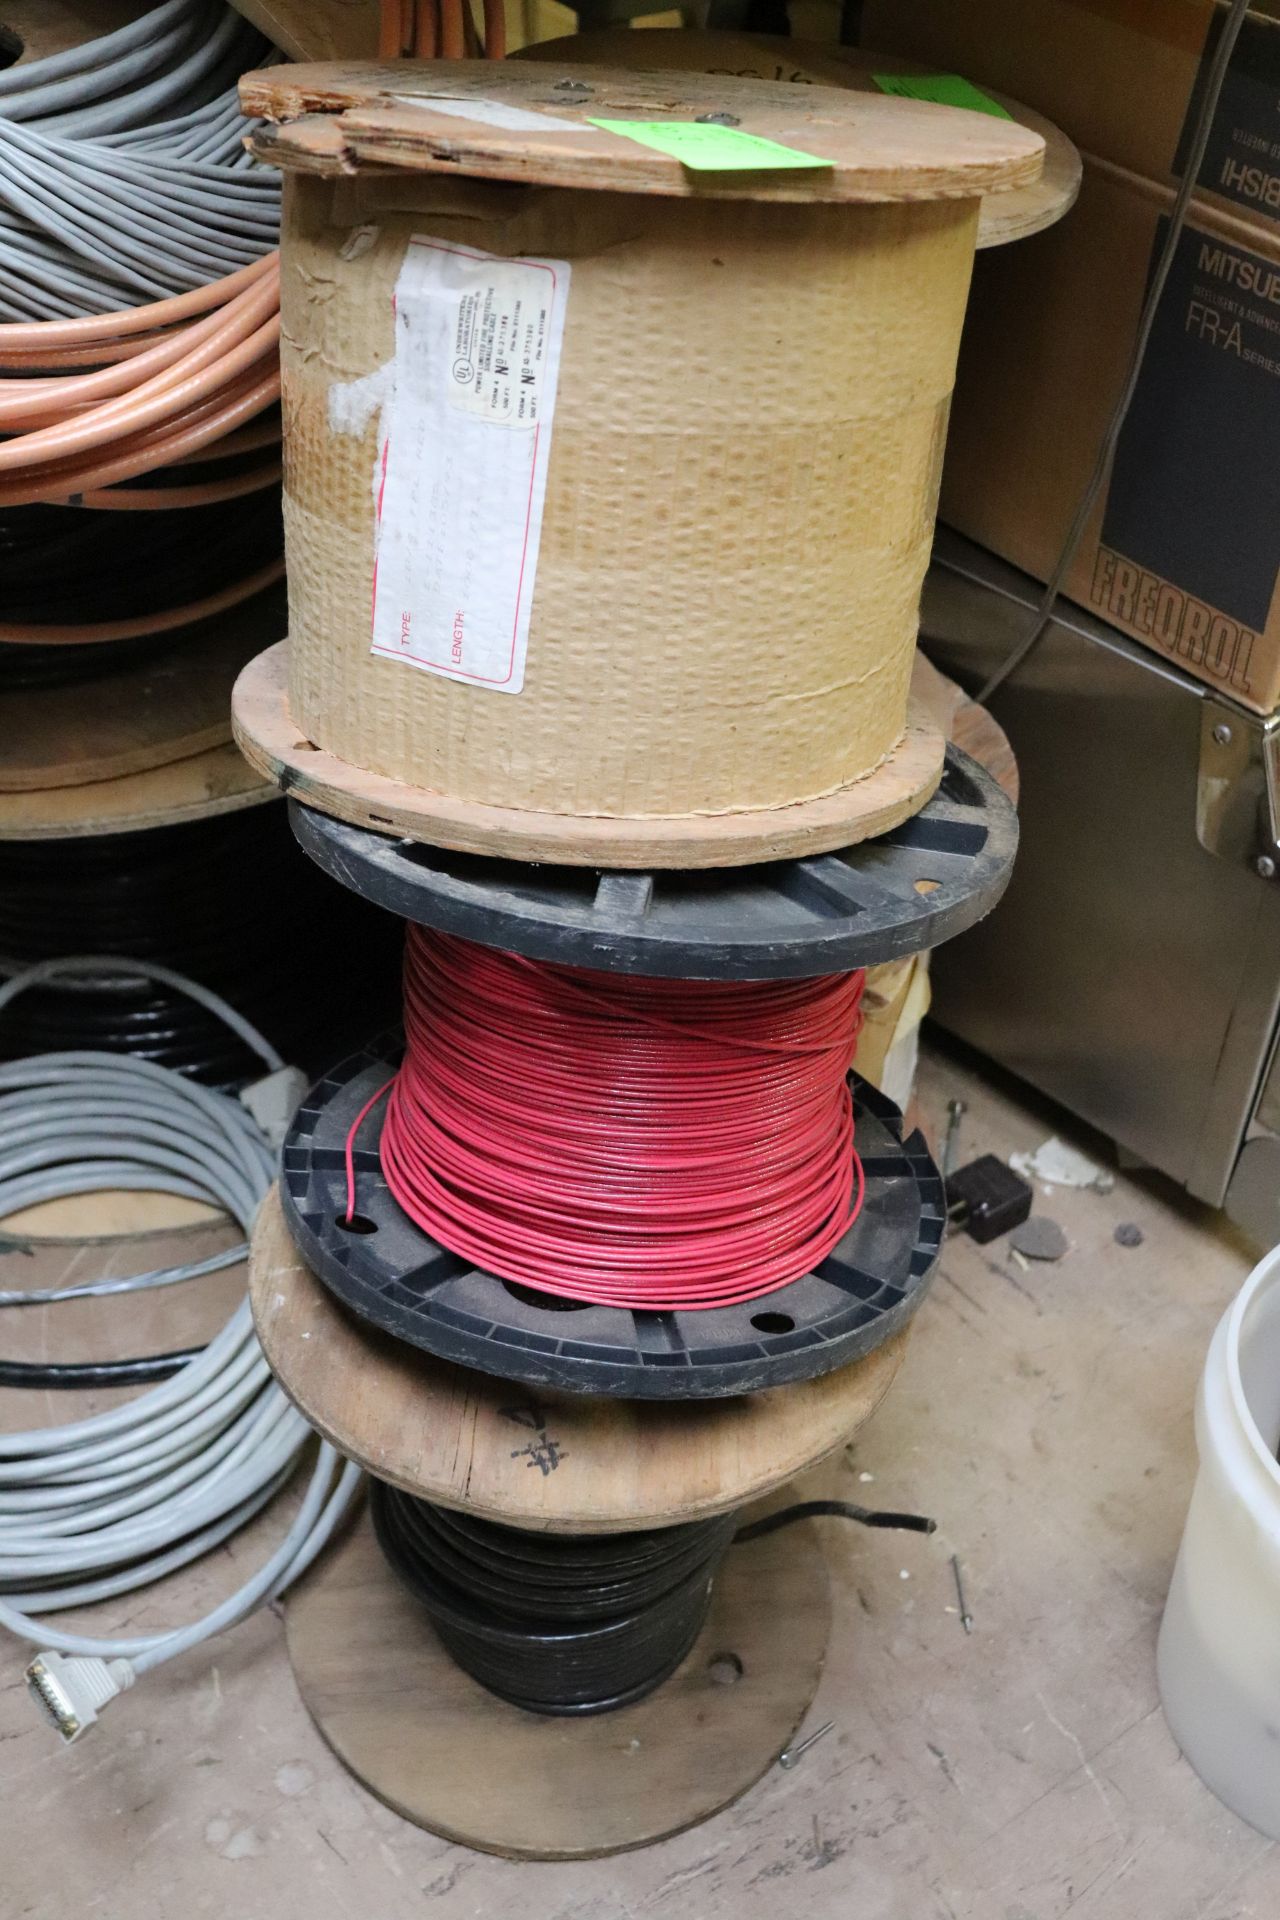 Two spools of communication wire